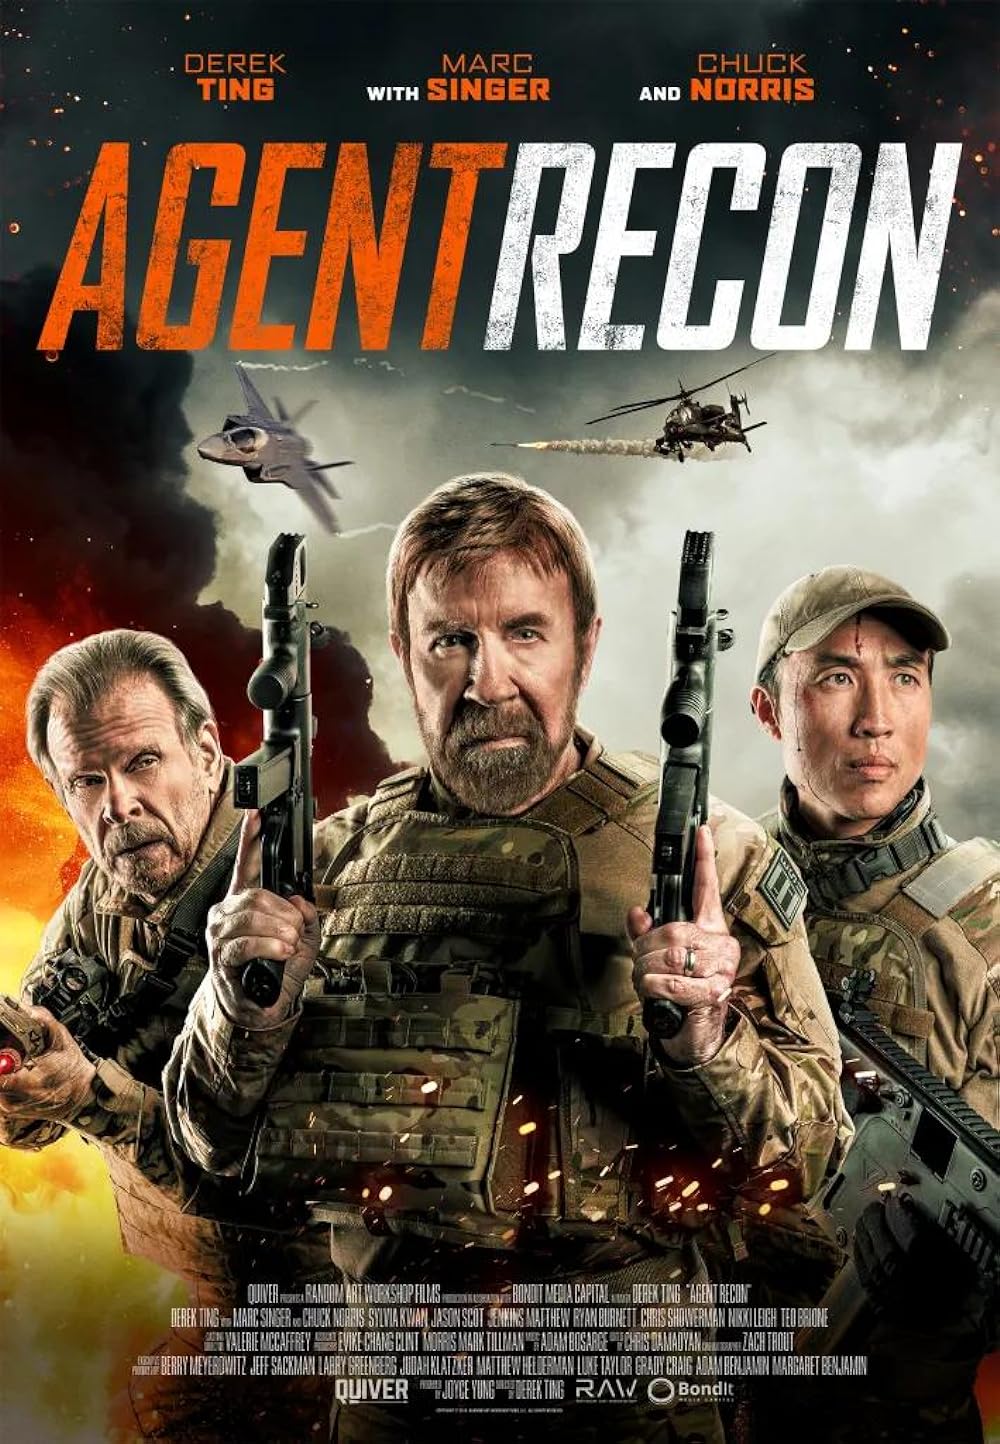 Chuck Norris returns with a vengeance in Agent Recon, so get ready for some roundhouse kicking action in the trailer below.